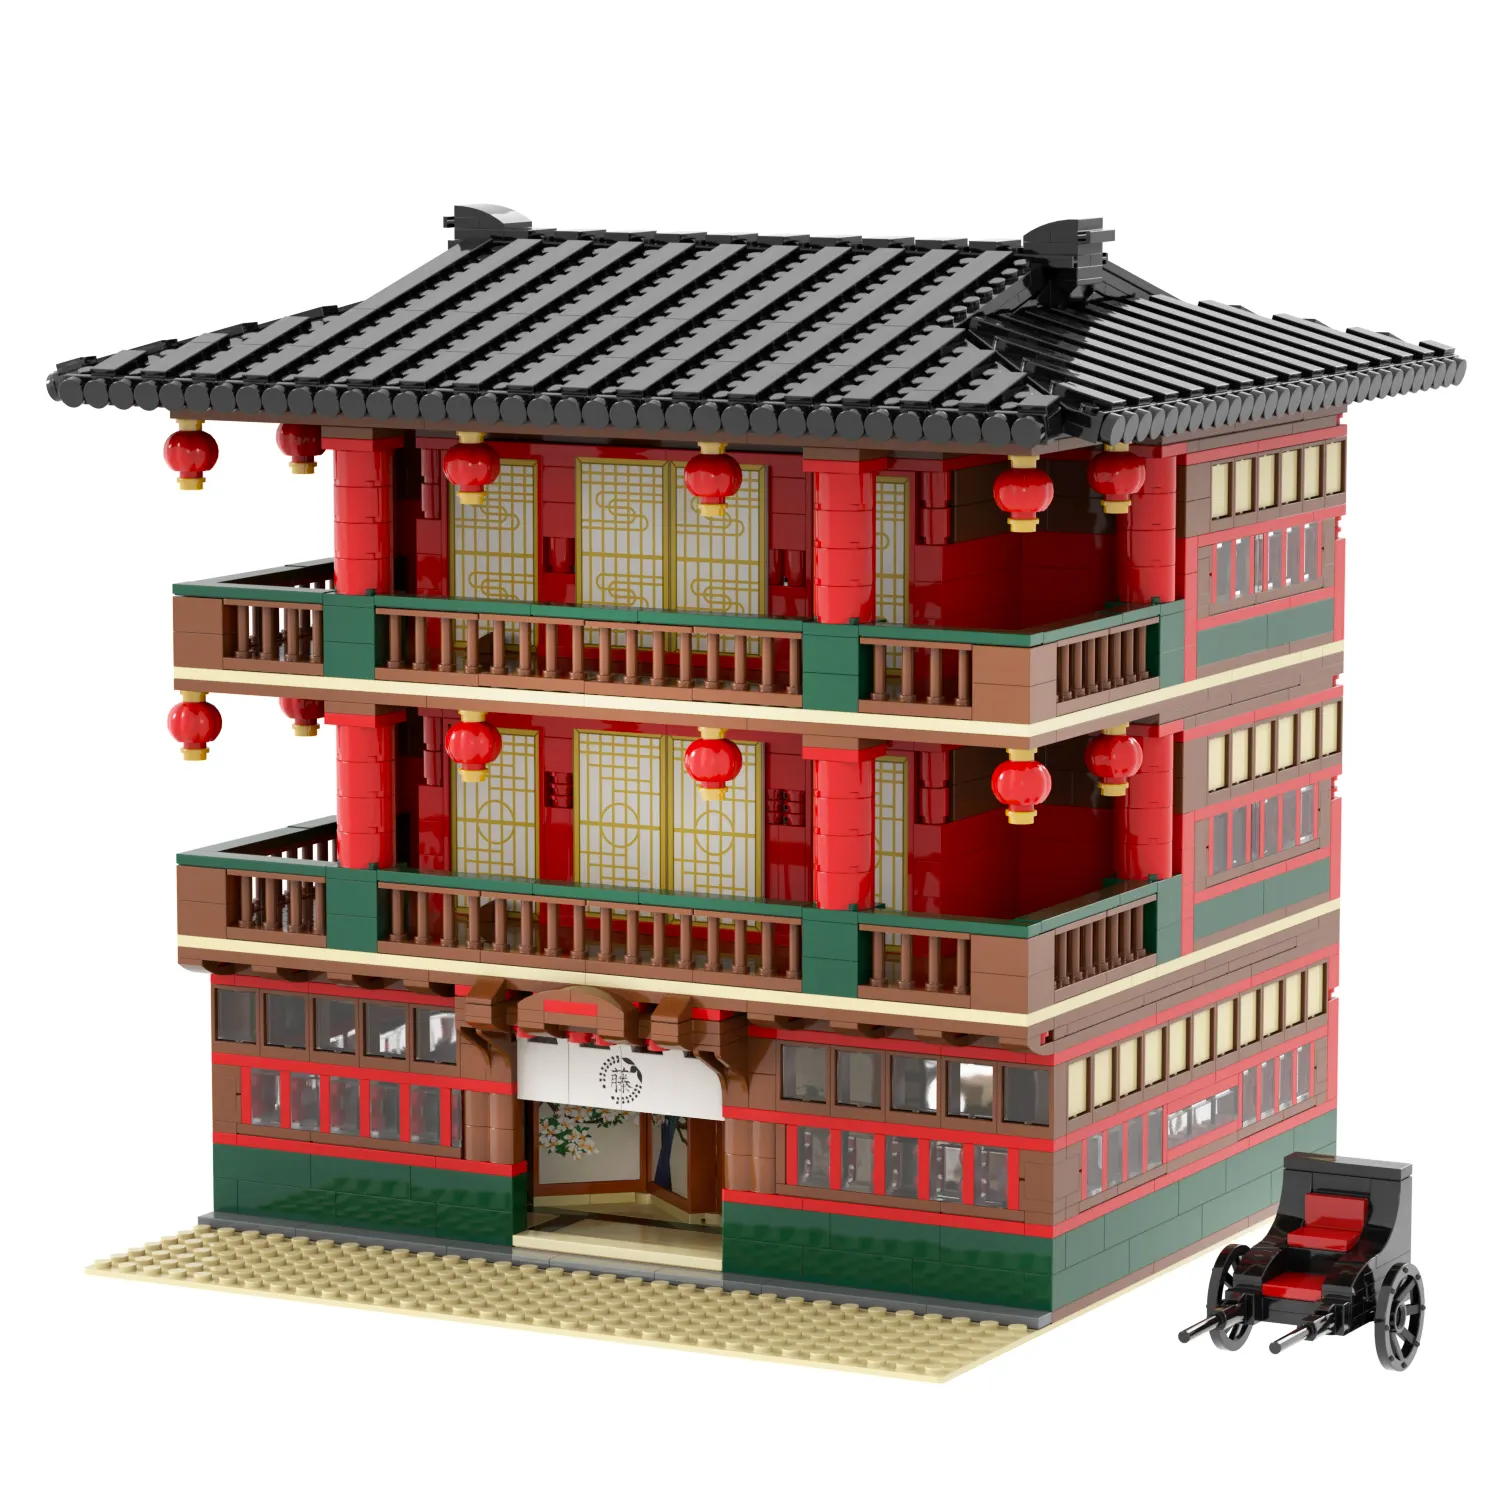 MOC1039 Flower Street 2720Pcs Model Bricks City Compatible with Figures Action Building Blocks Toys For Children Birthday Gifts